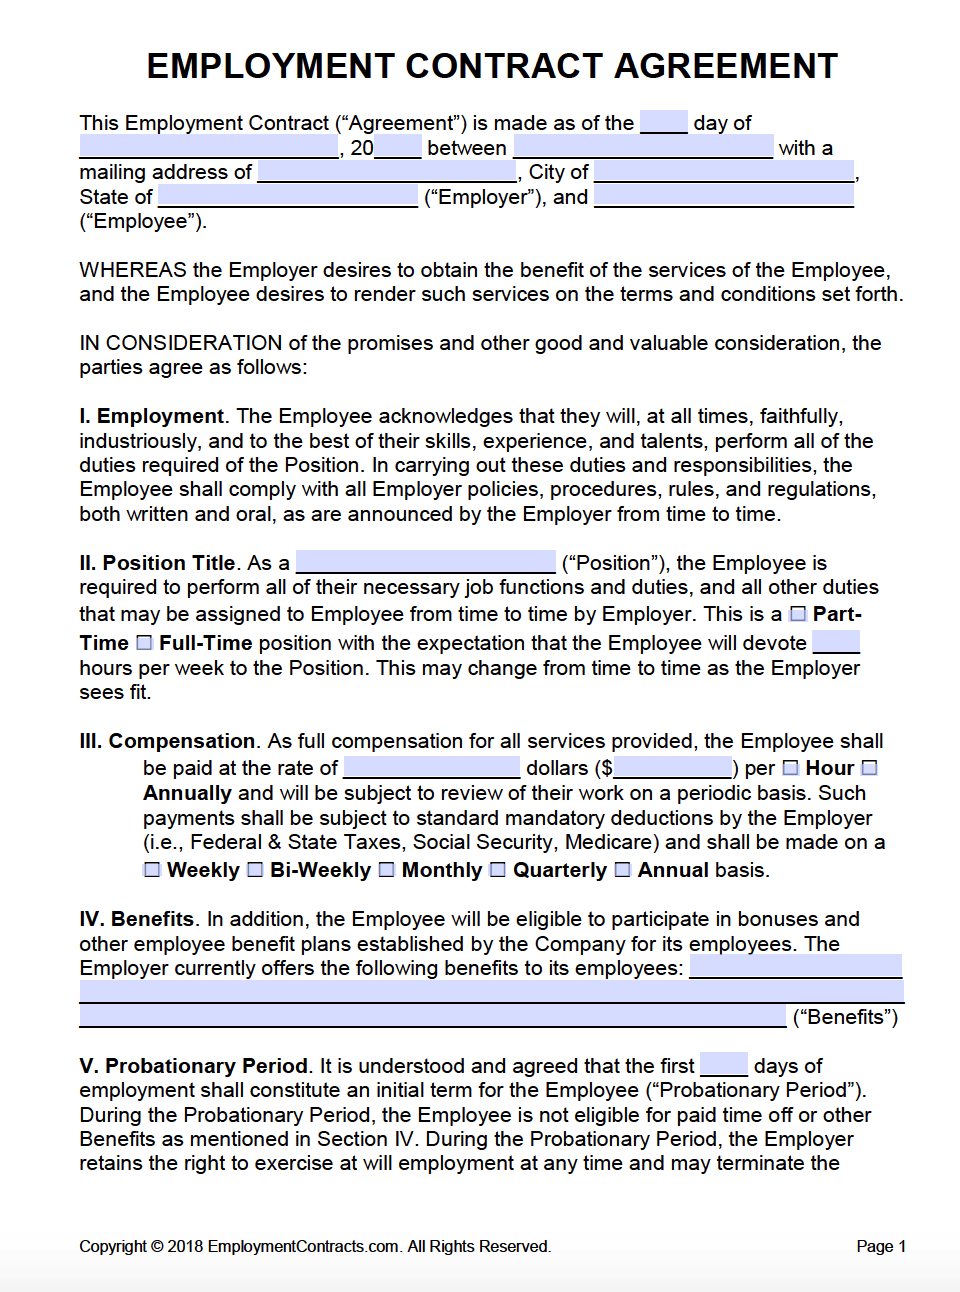 Agreement With Employee Employment Agreement Contracts Pdf Word